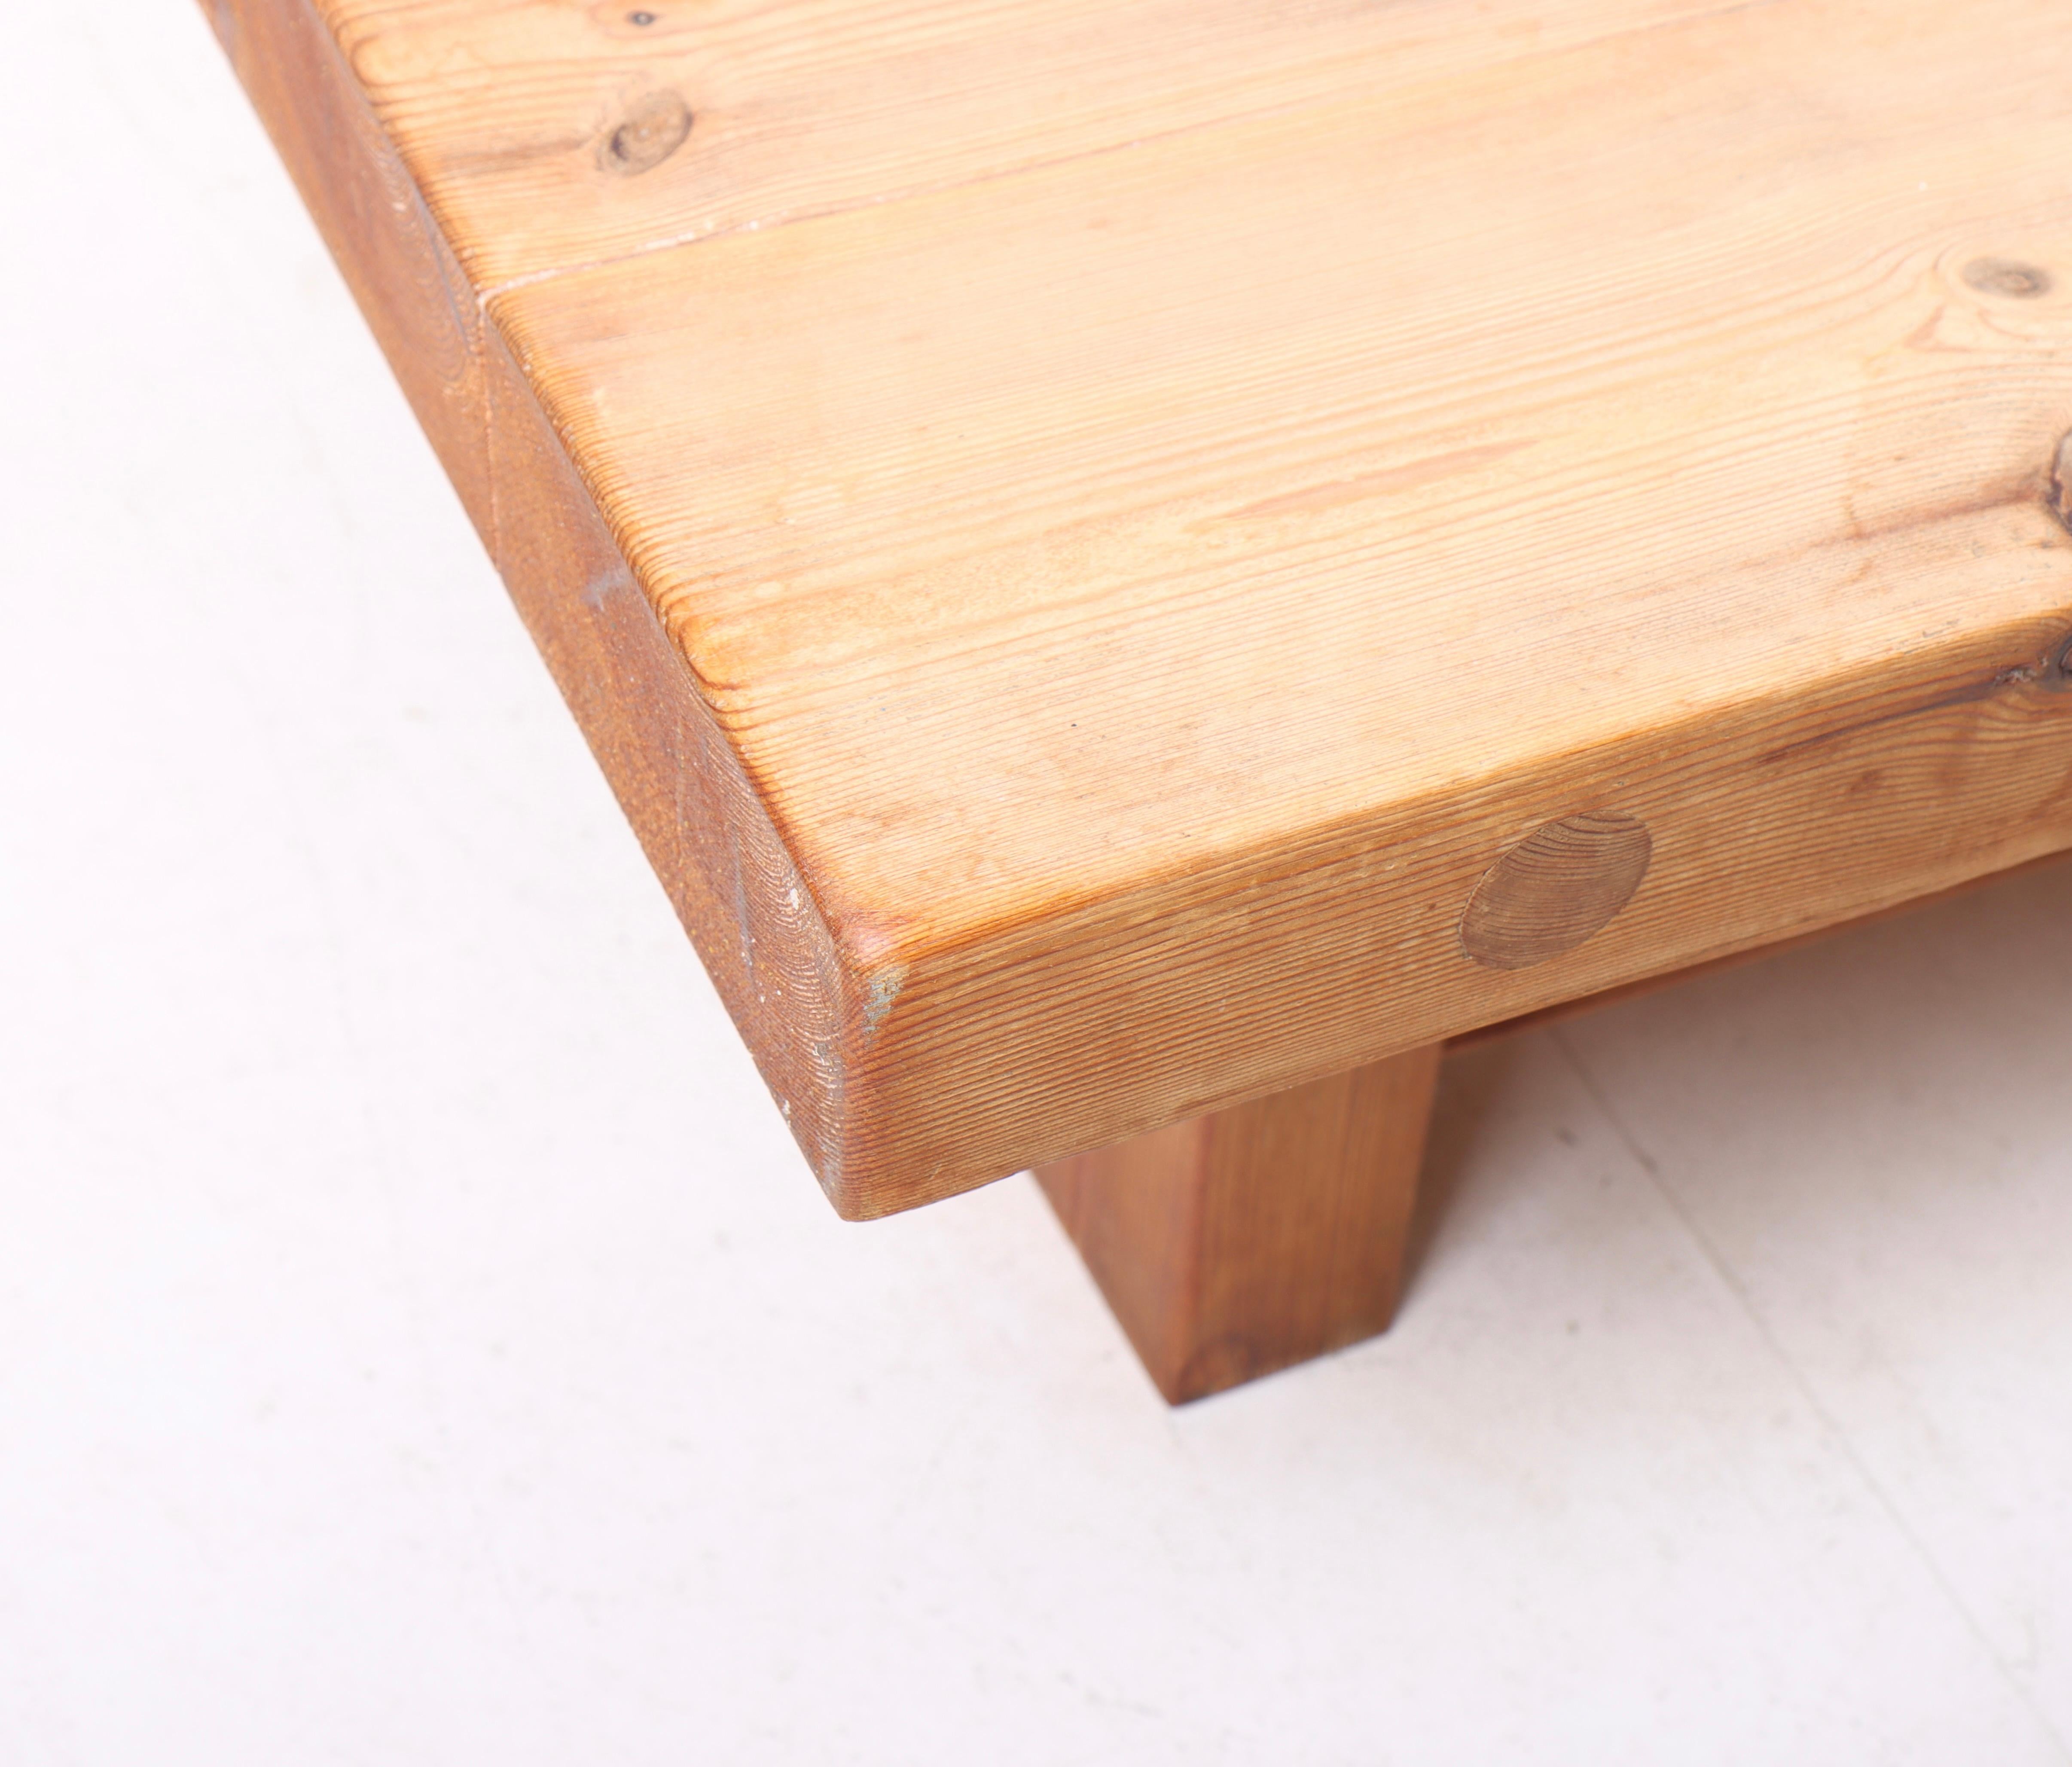 Scandinavian Modern Mid-Century Scandinavian Low Table in Solid Patinated Pine, 1950s For Sale